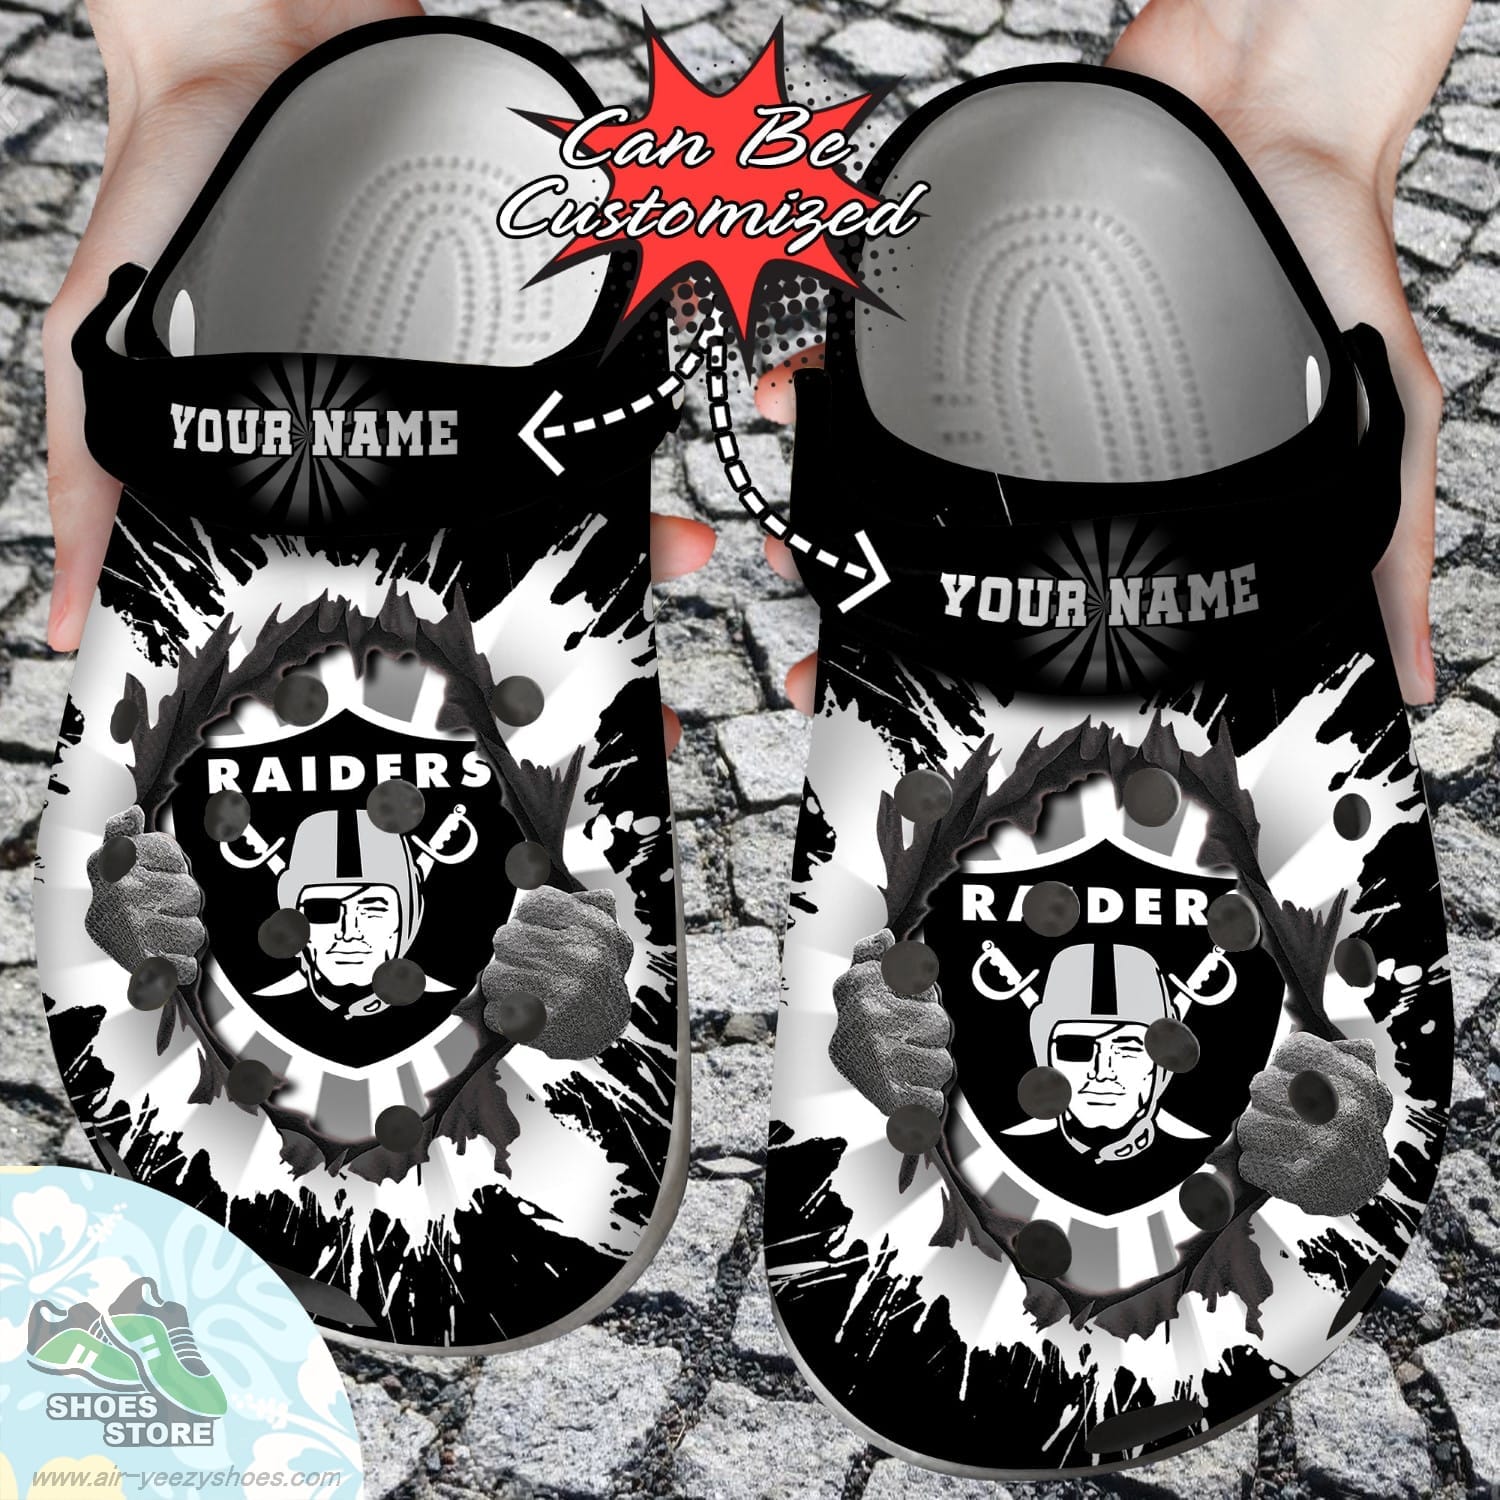 Personalized Las Vegas Raiders Hands Ripping Light Clog Shoes Football Crocs Shoes